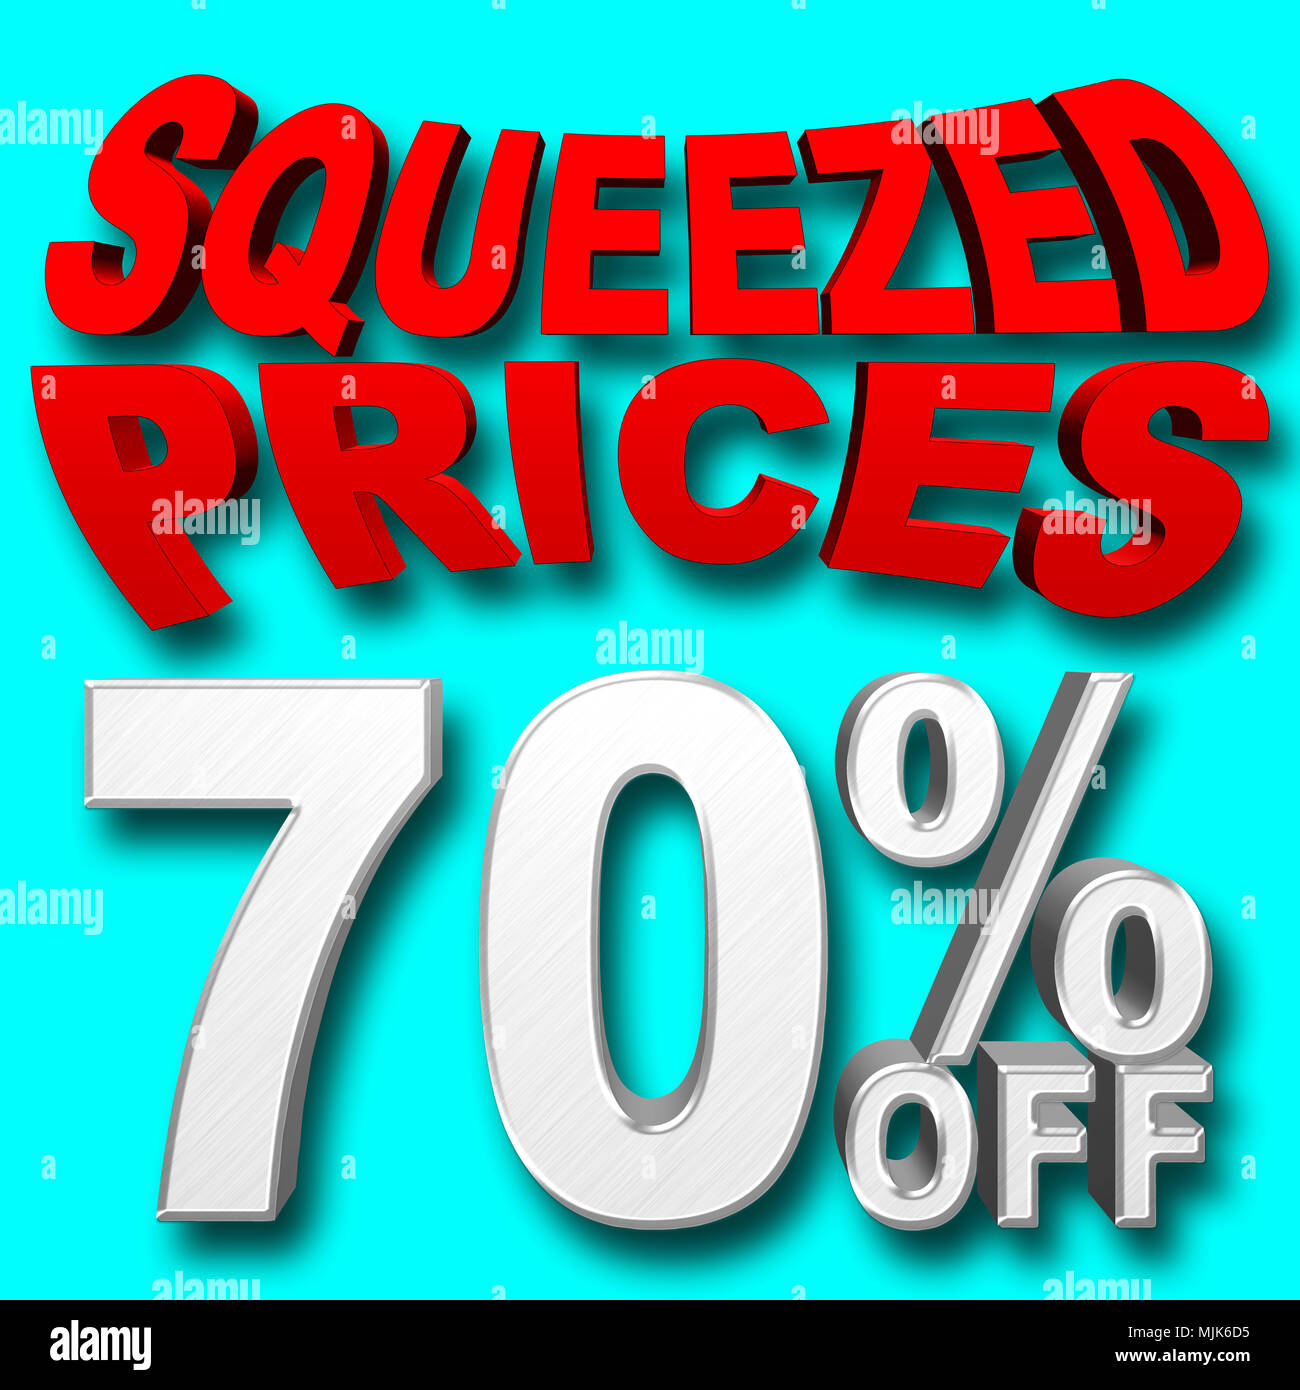 Stock Illustration - Large Shiny Silver Text: 70 Percentage Off, Red Text: Squeezed Prices, 3D Illustration, Blue Background, Different. Stock Photo